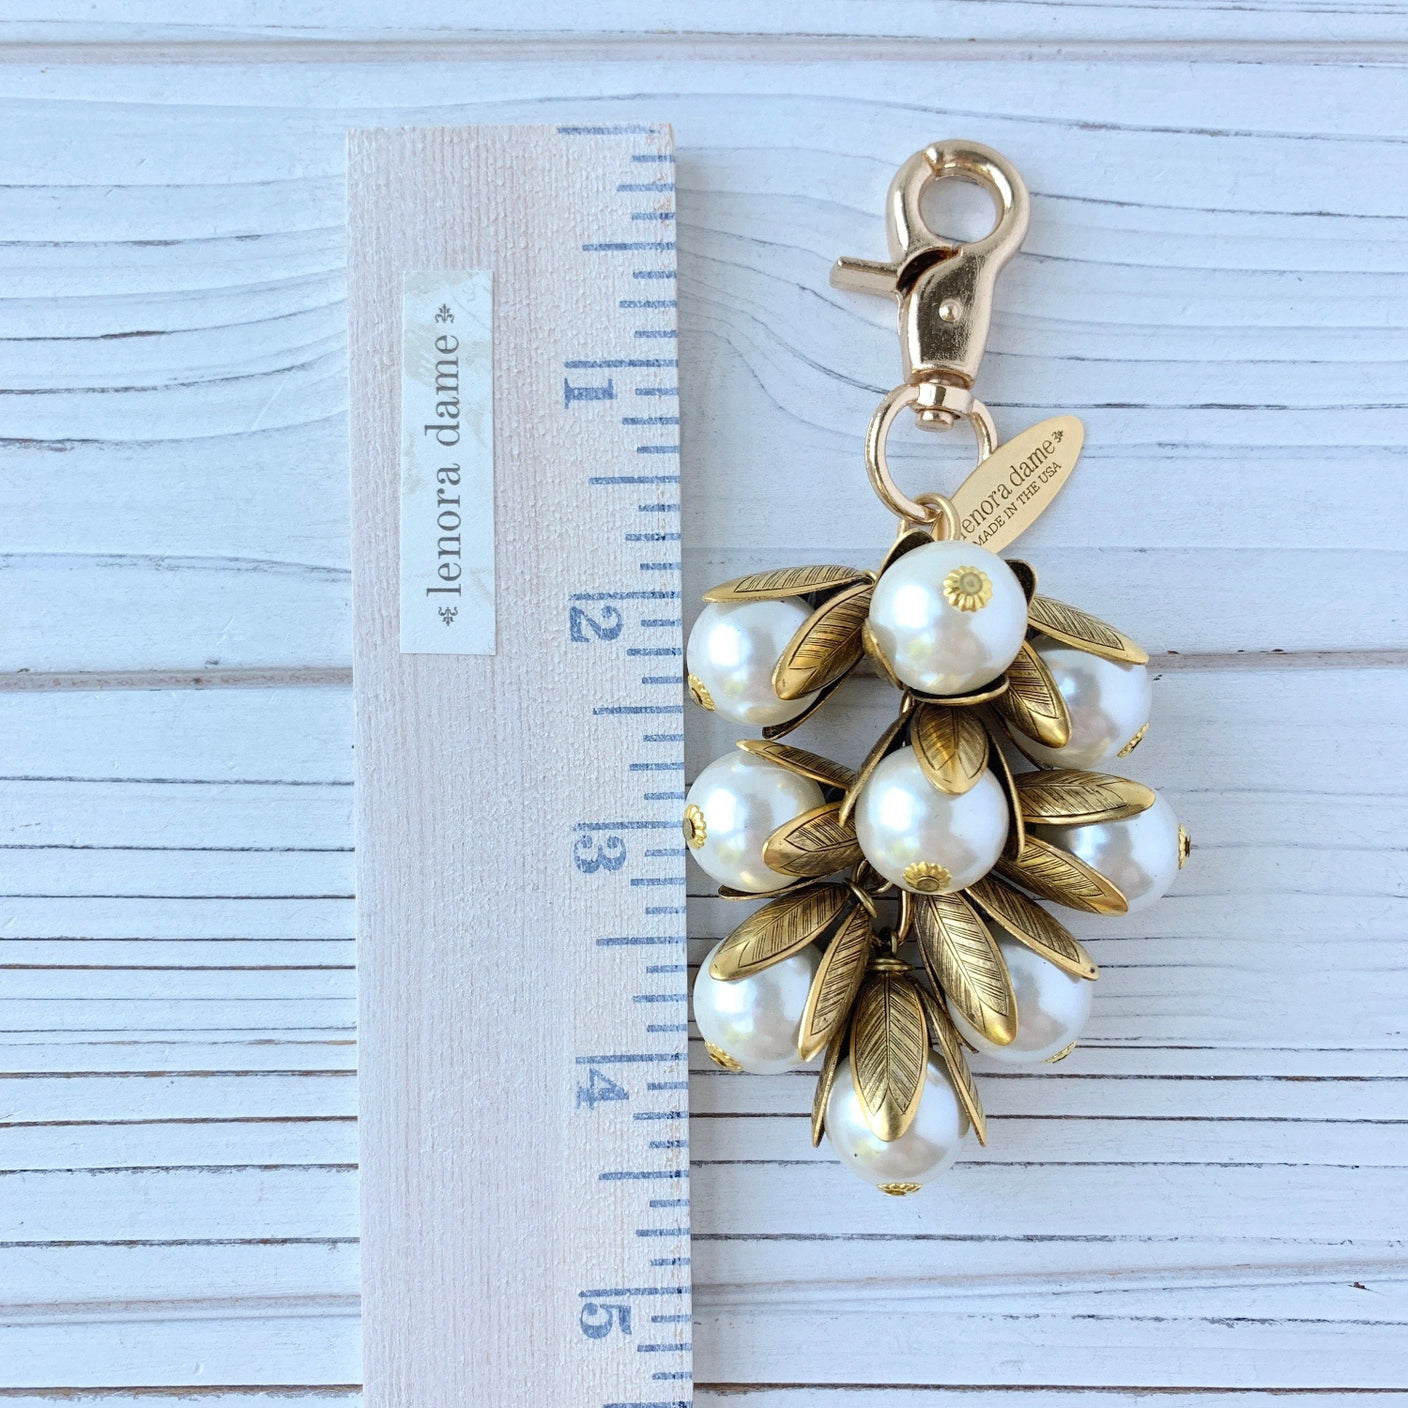 The Bauble Bag Charm